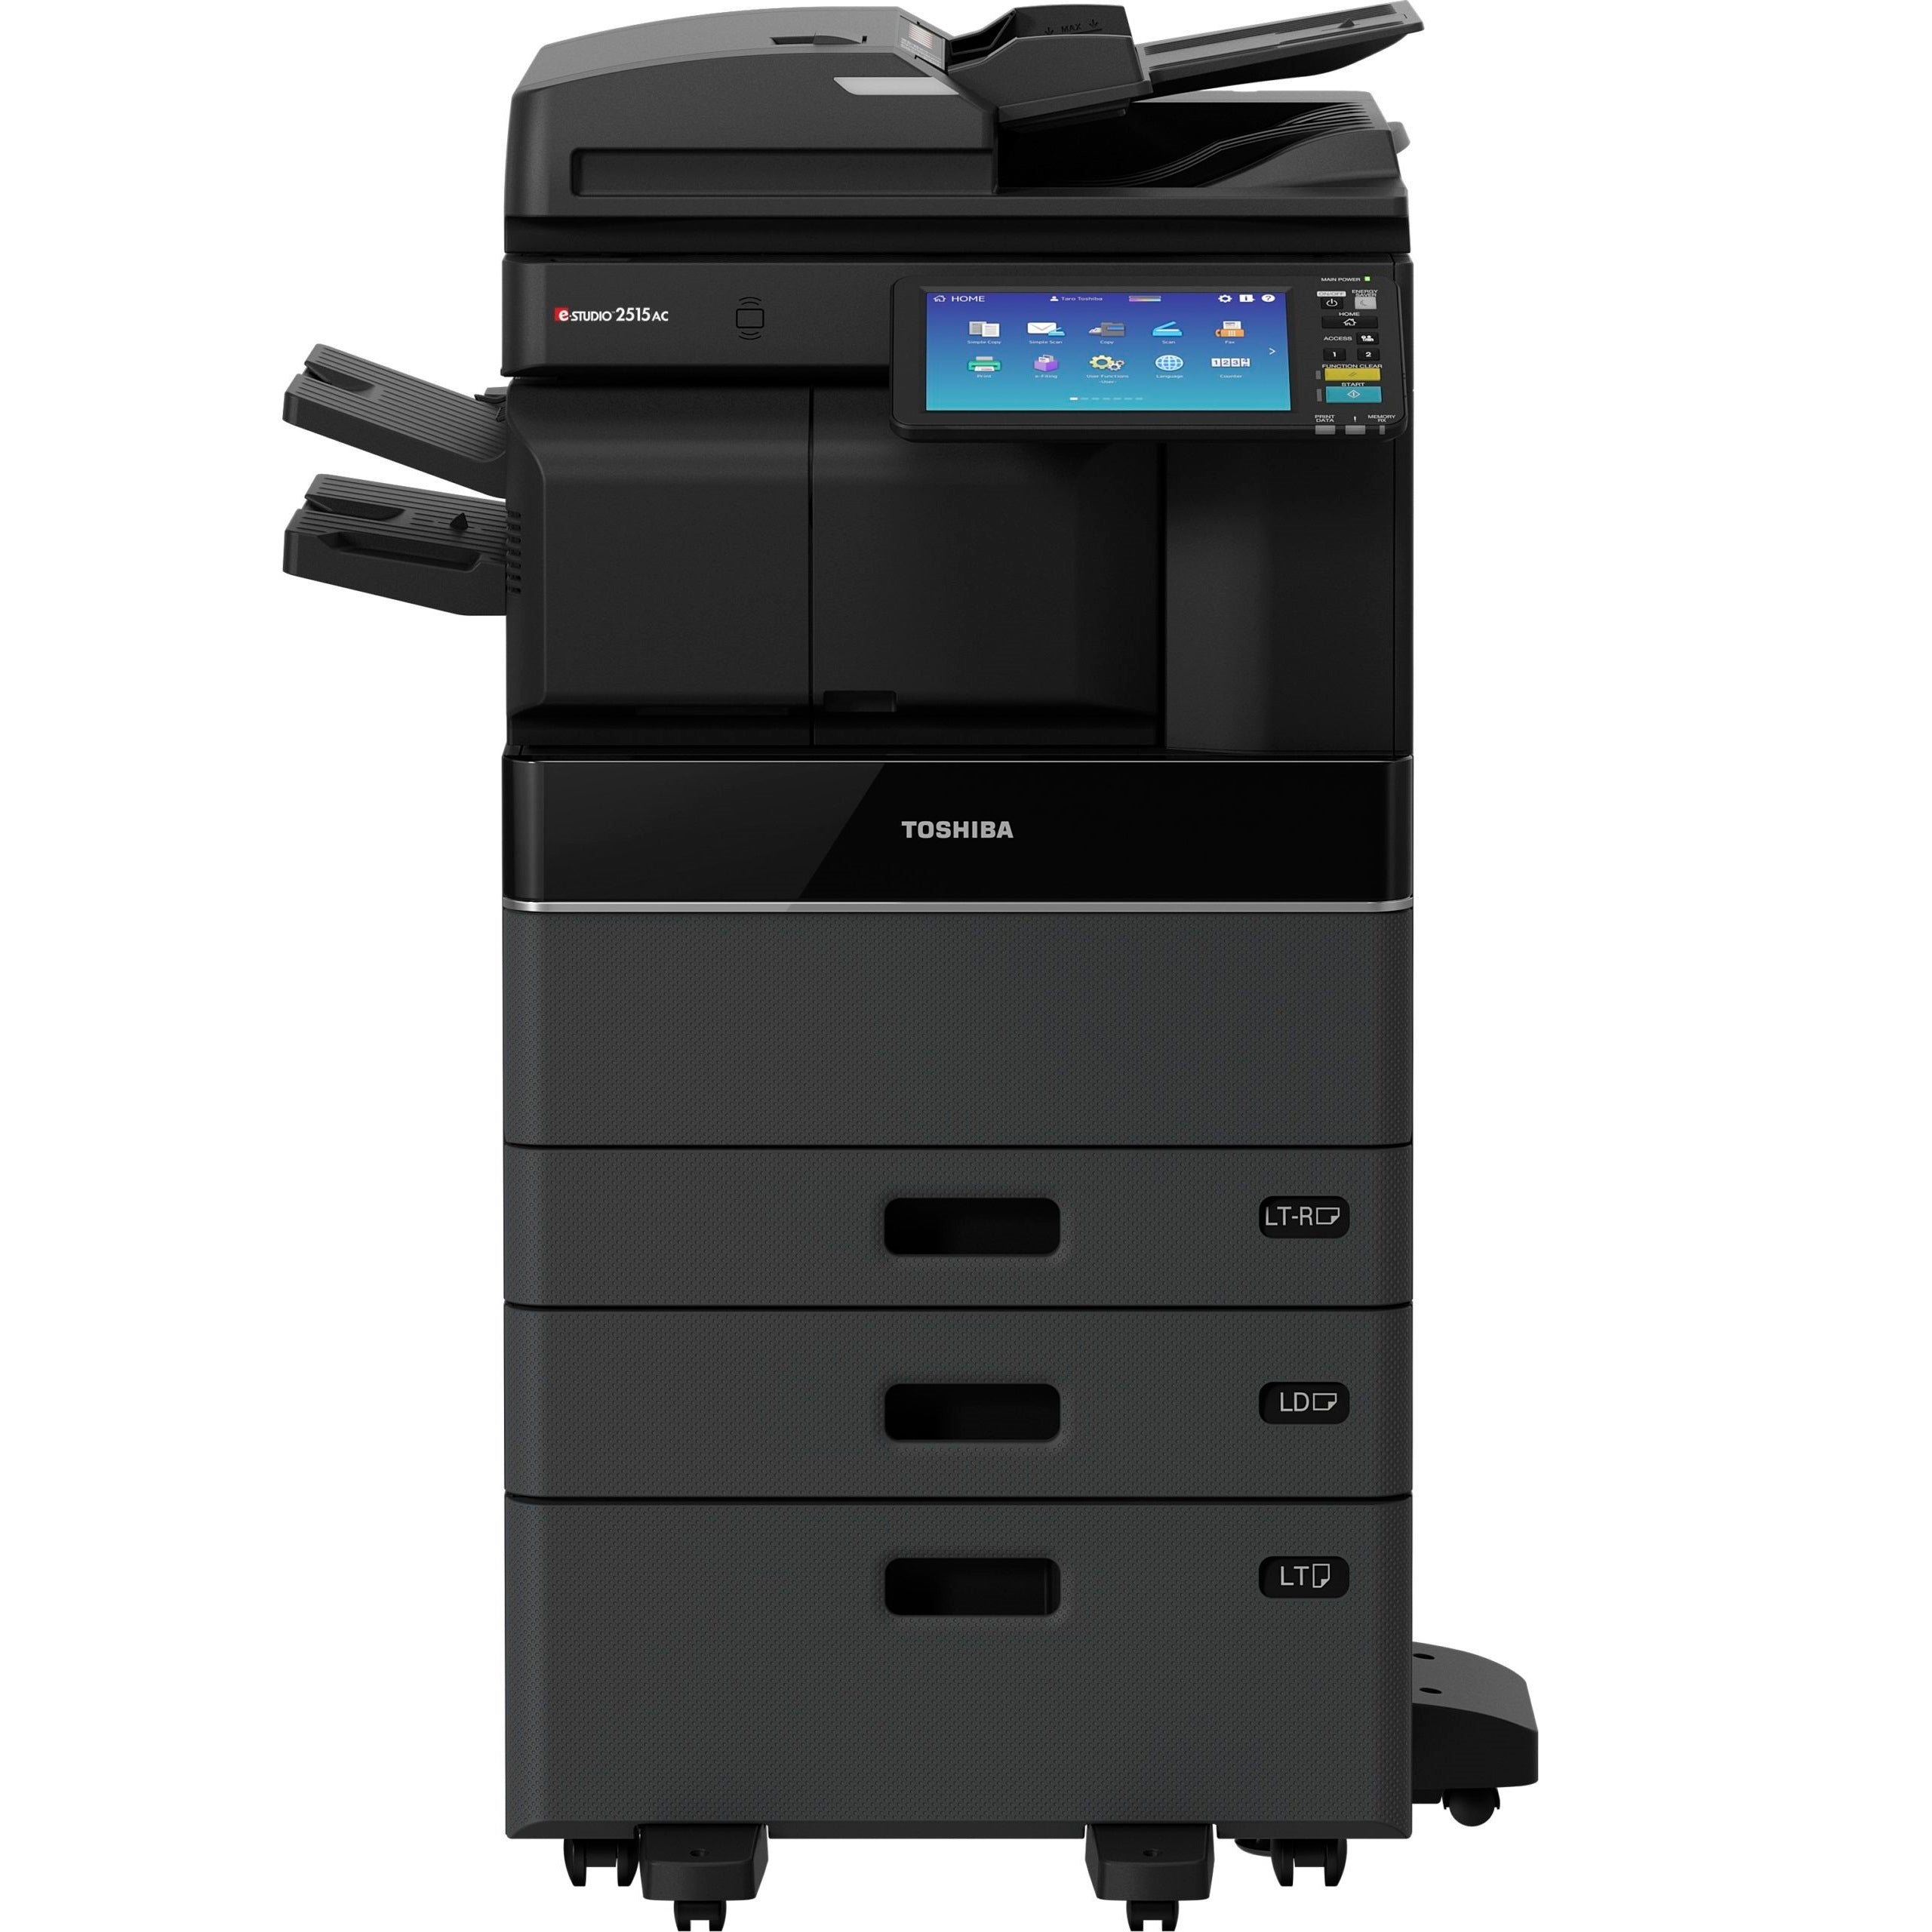 Toshiba E-Studio 2515AC Multifunction Color Printer Copier Scanner With Speed Up To 25 PPM For Sale In Canada